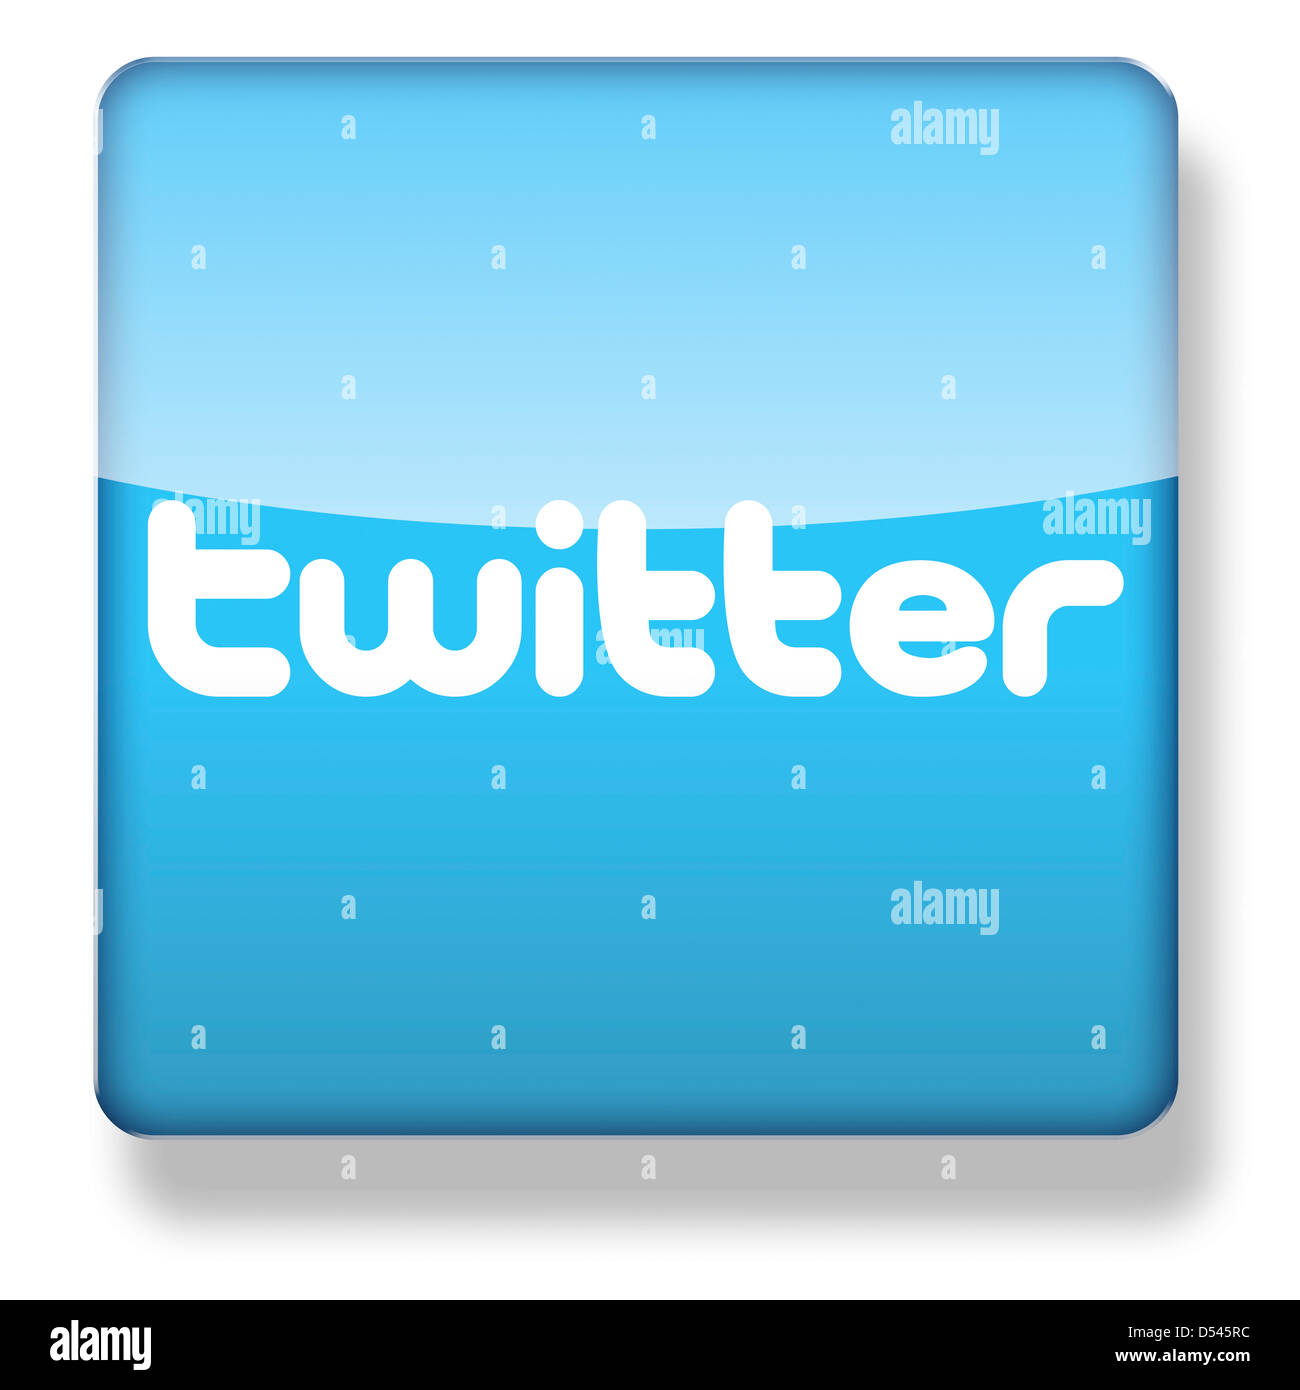 Twitter logo as an app icon. Clipping path included. Stock Photo